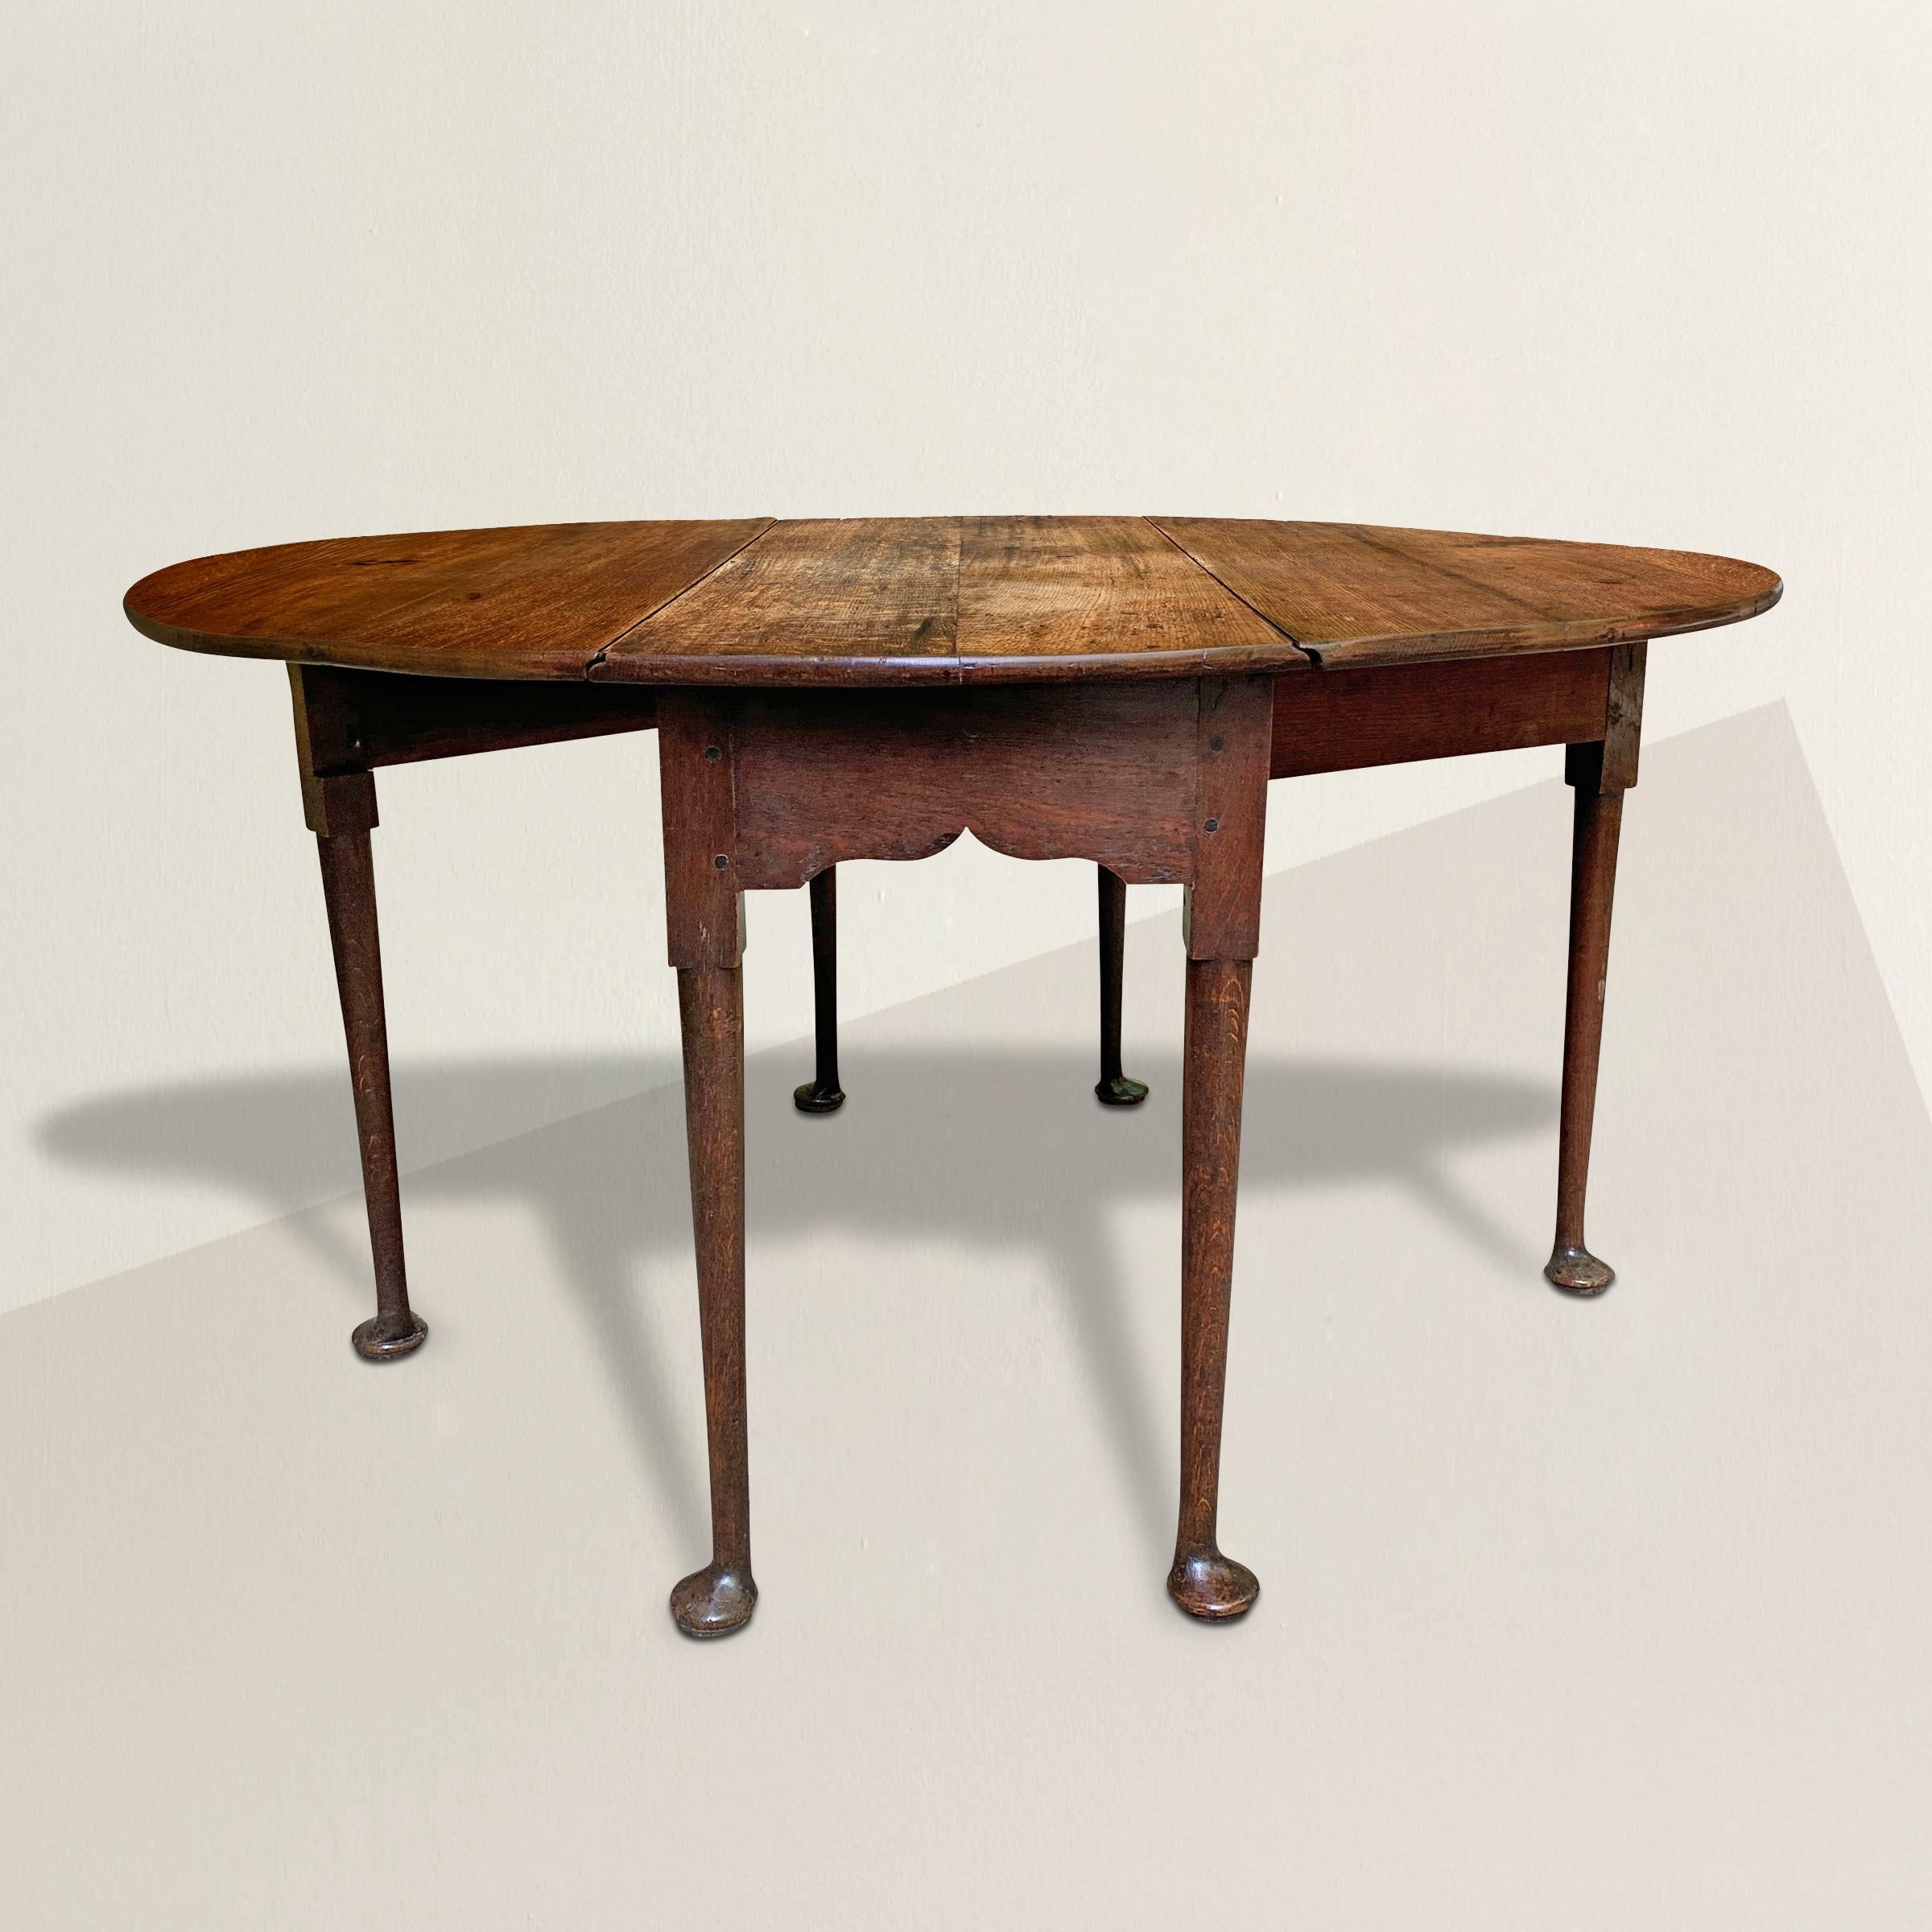 A fantastic early 19th century English Queen Anne oak drop-leaf gate-leg breakfast table with round straight tapered legs ending in the most wonderful large pad feet that give the appearance as though the table could get up and walk away. This table